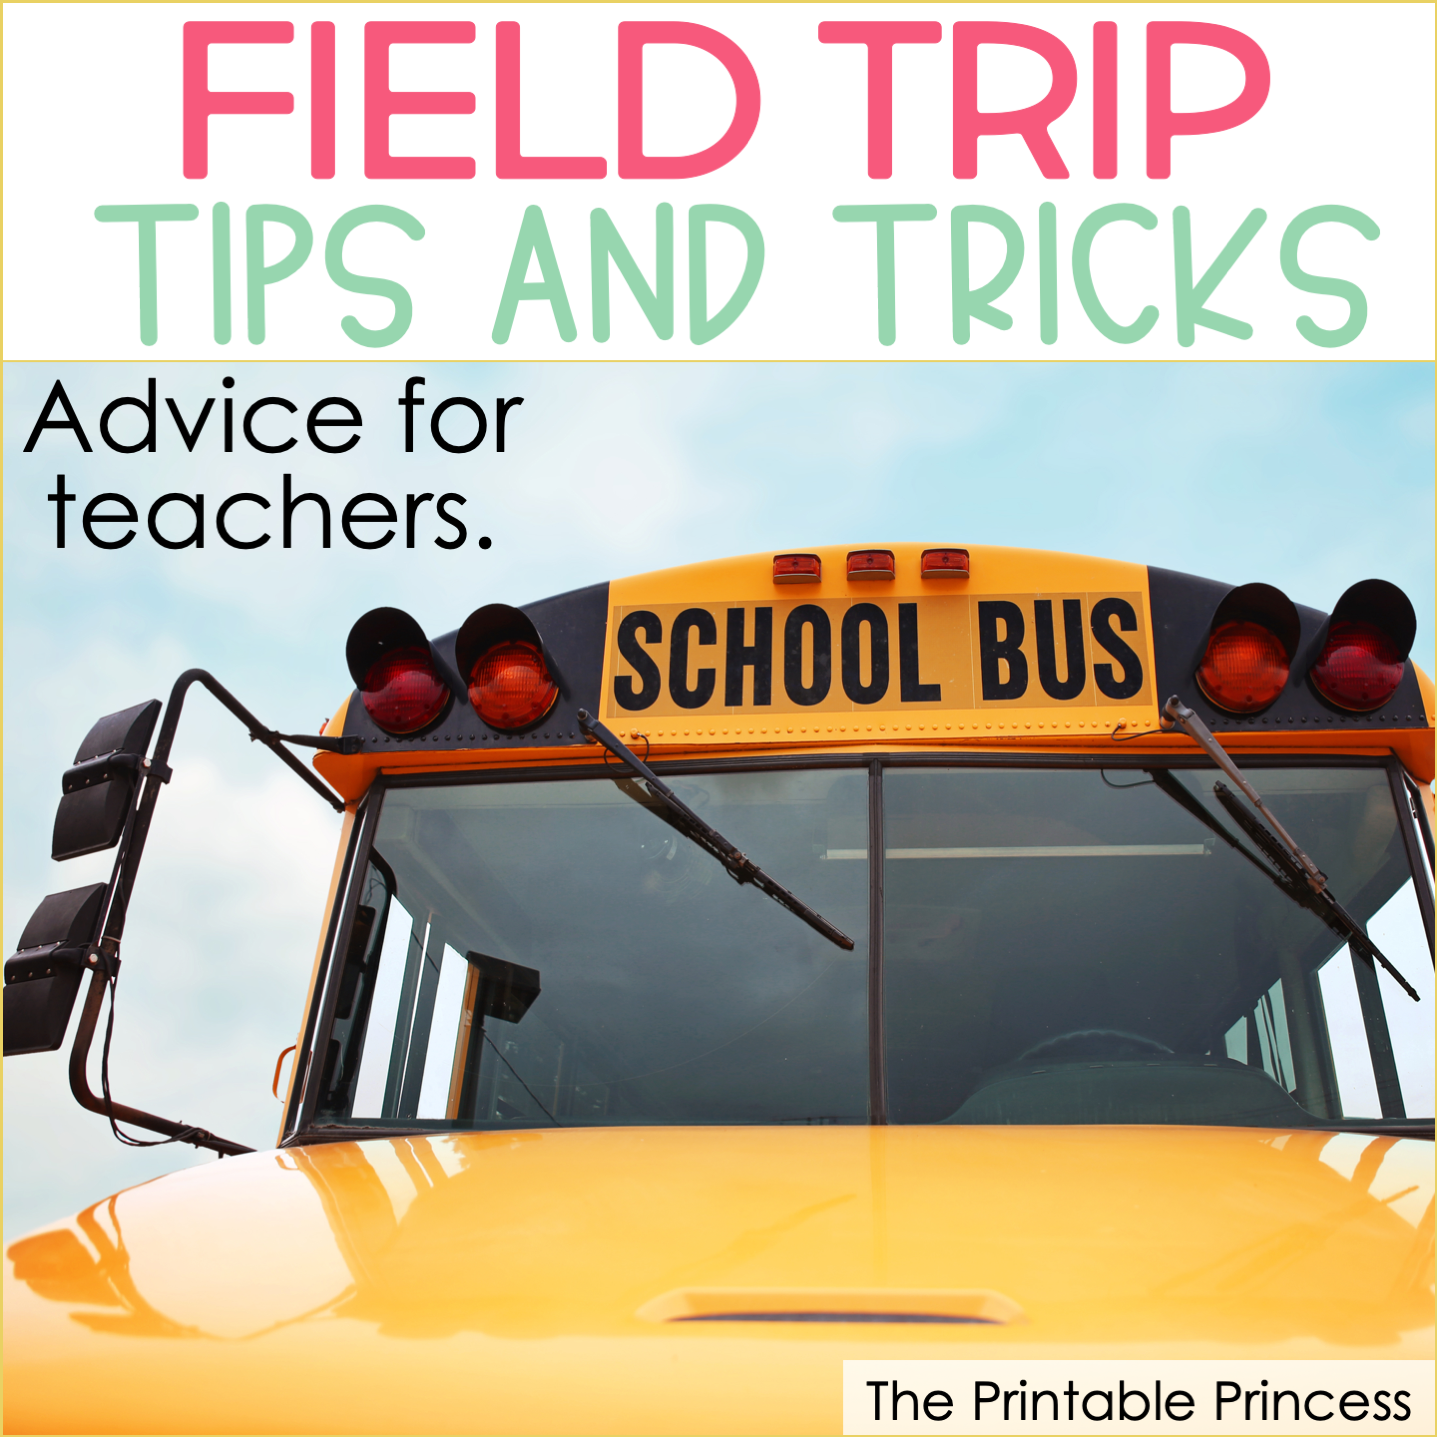 Field Trip Tips and Tricks for Teachers